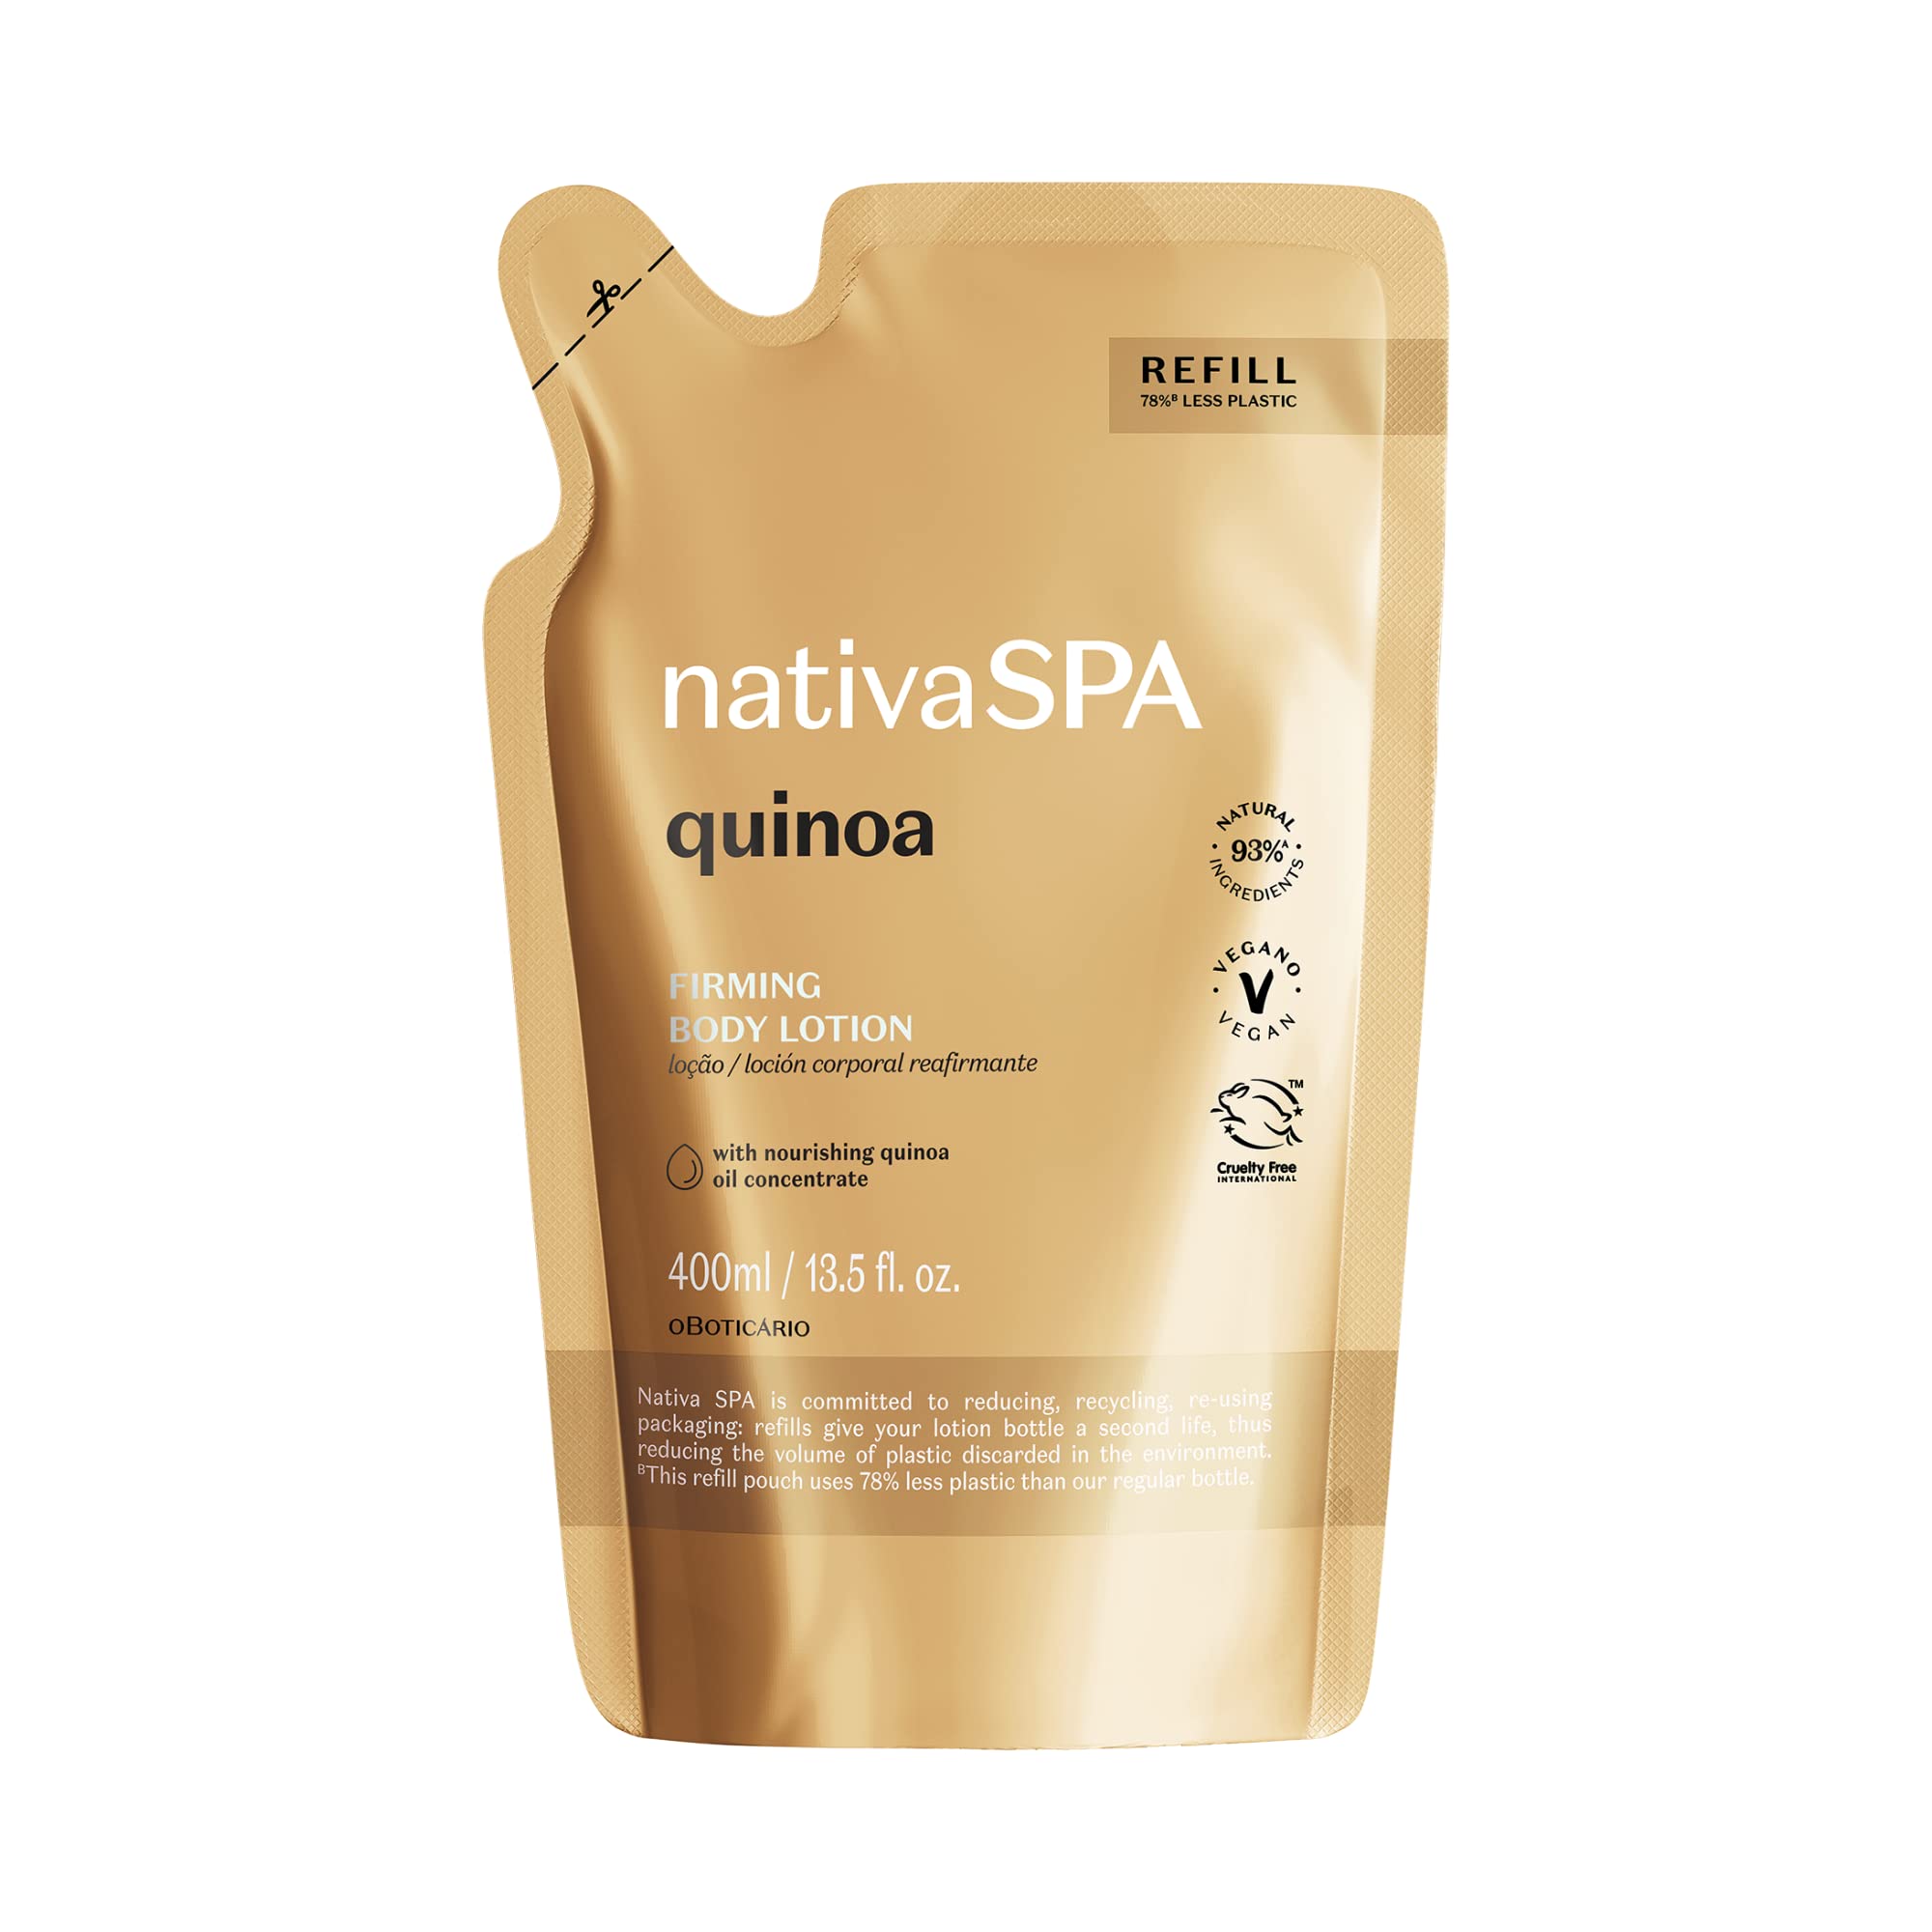 Nativa SPA by O Boticário, Quinoa Moisturizing Body Lotion Refill Pack, Fragranced Moisturizer Enriched with Purified Quinoa Drops to Boost Hydration, 13.5 Ounce